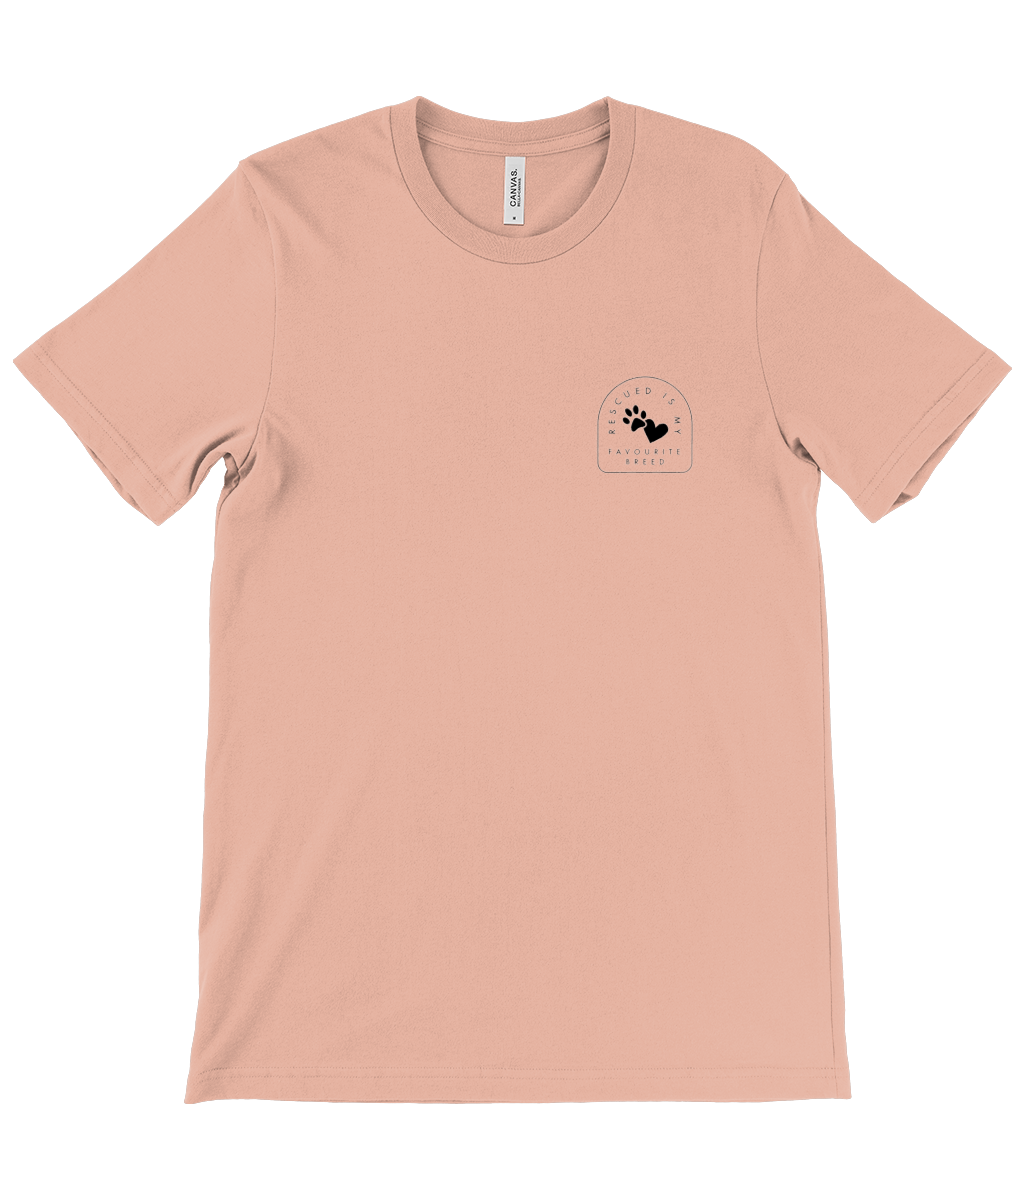 Unisex Rescued Breed T-Shirt - Soft Cotton, Vegan Inks, Supports Animal Welfare